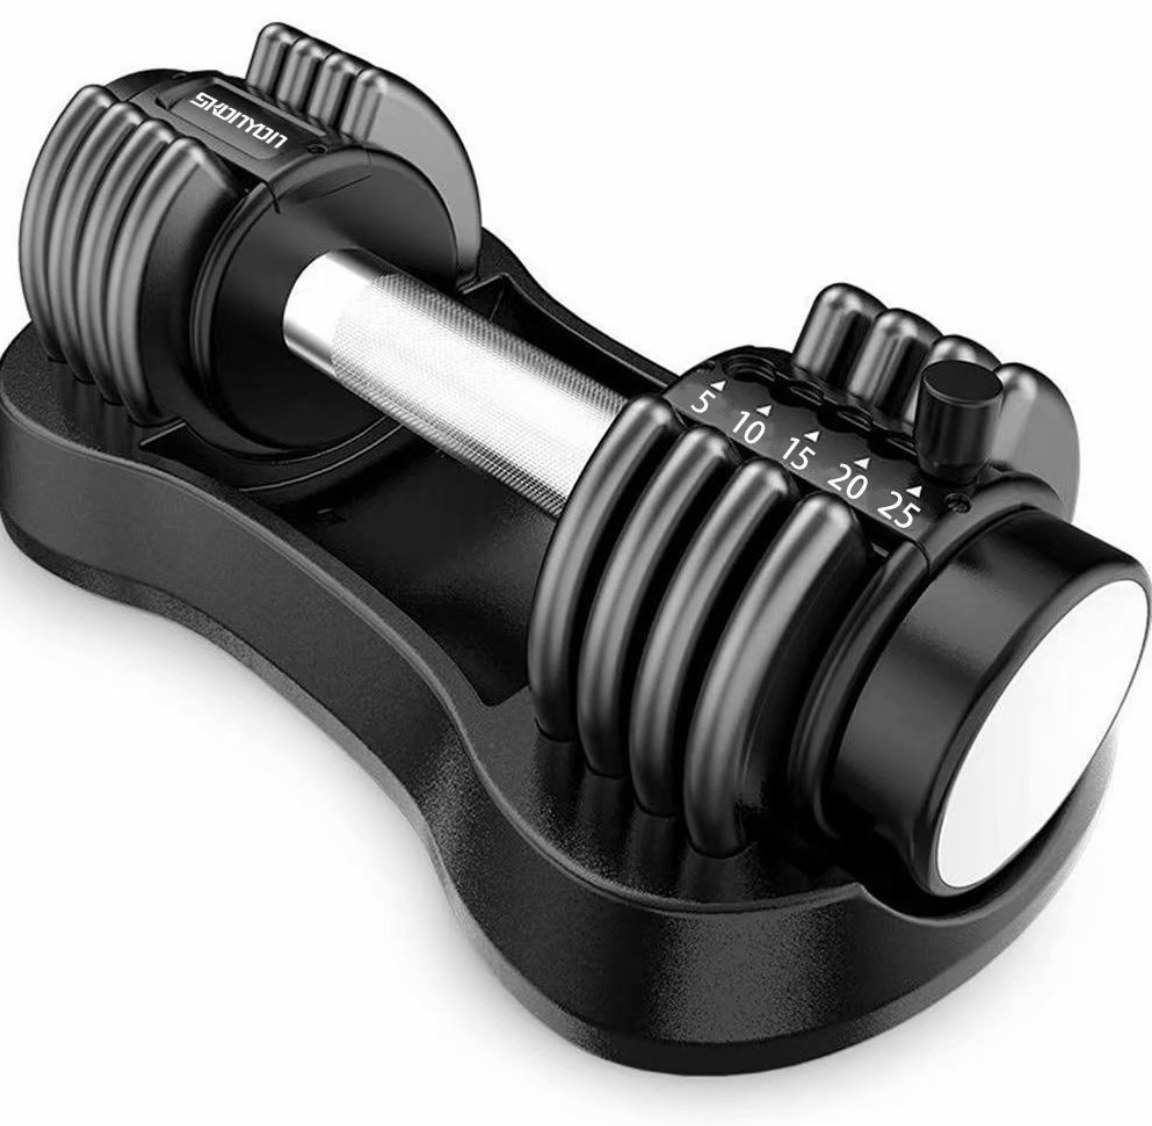 The adjustable dumbbell